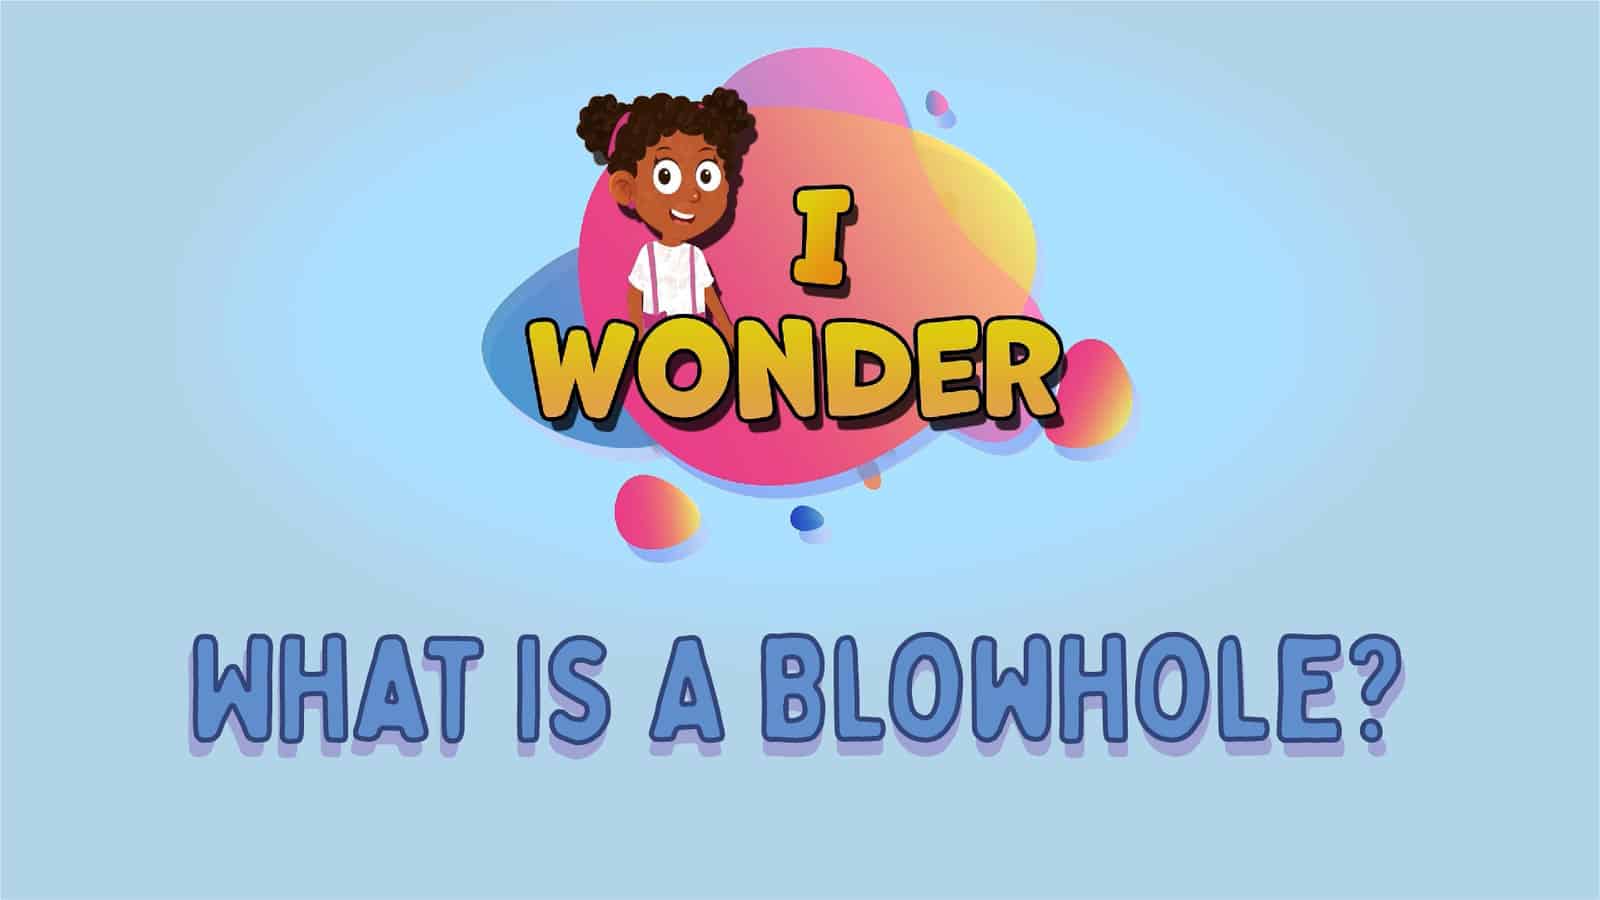 What Is A Blowhole?